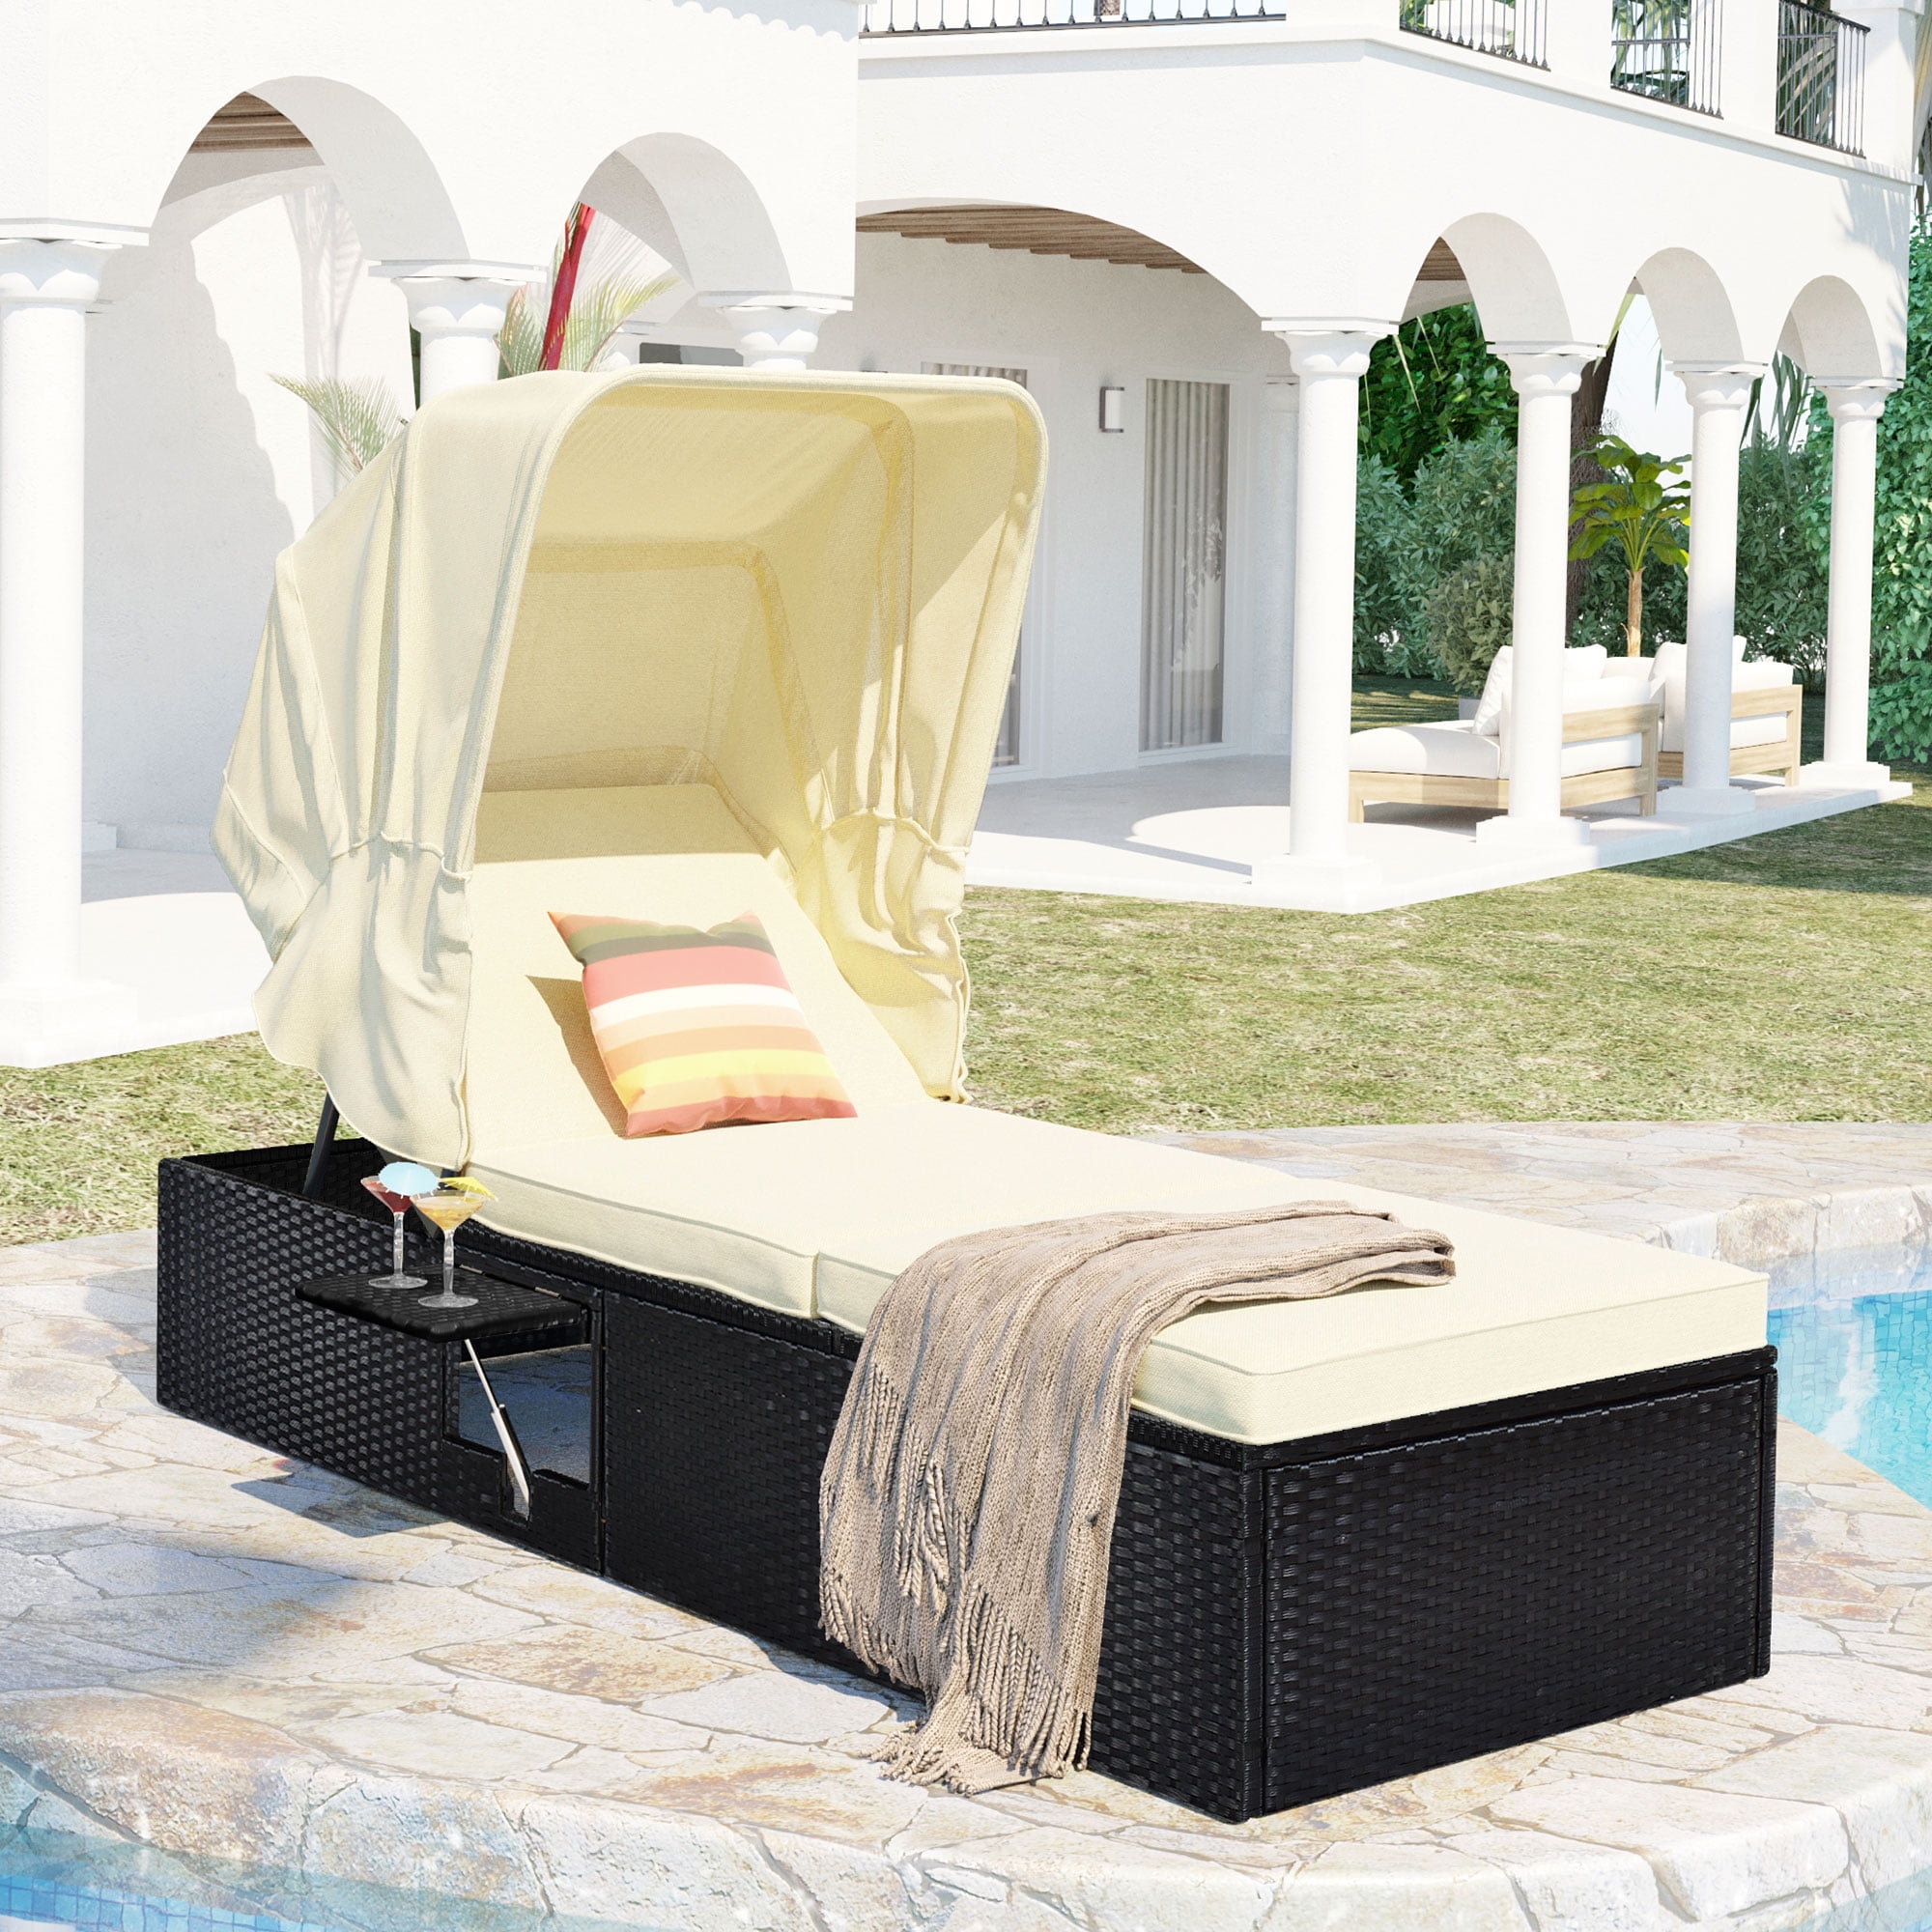 Outdoor Chaise Lounge Reclining Chair Sun Bed Lounger Recliner Sunshade Canopy Tea Table Sponge Padded Seat Cushion 5 Adjustable Backrest Position Suitable For Beach Pool Side Balcony Patio Garden Use 